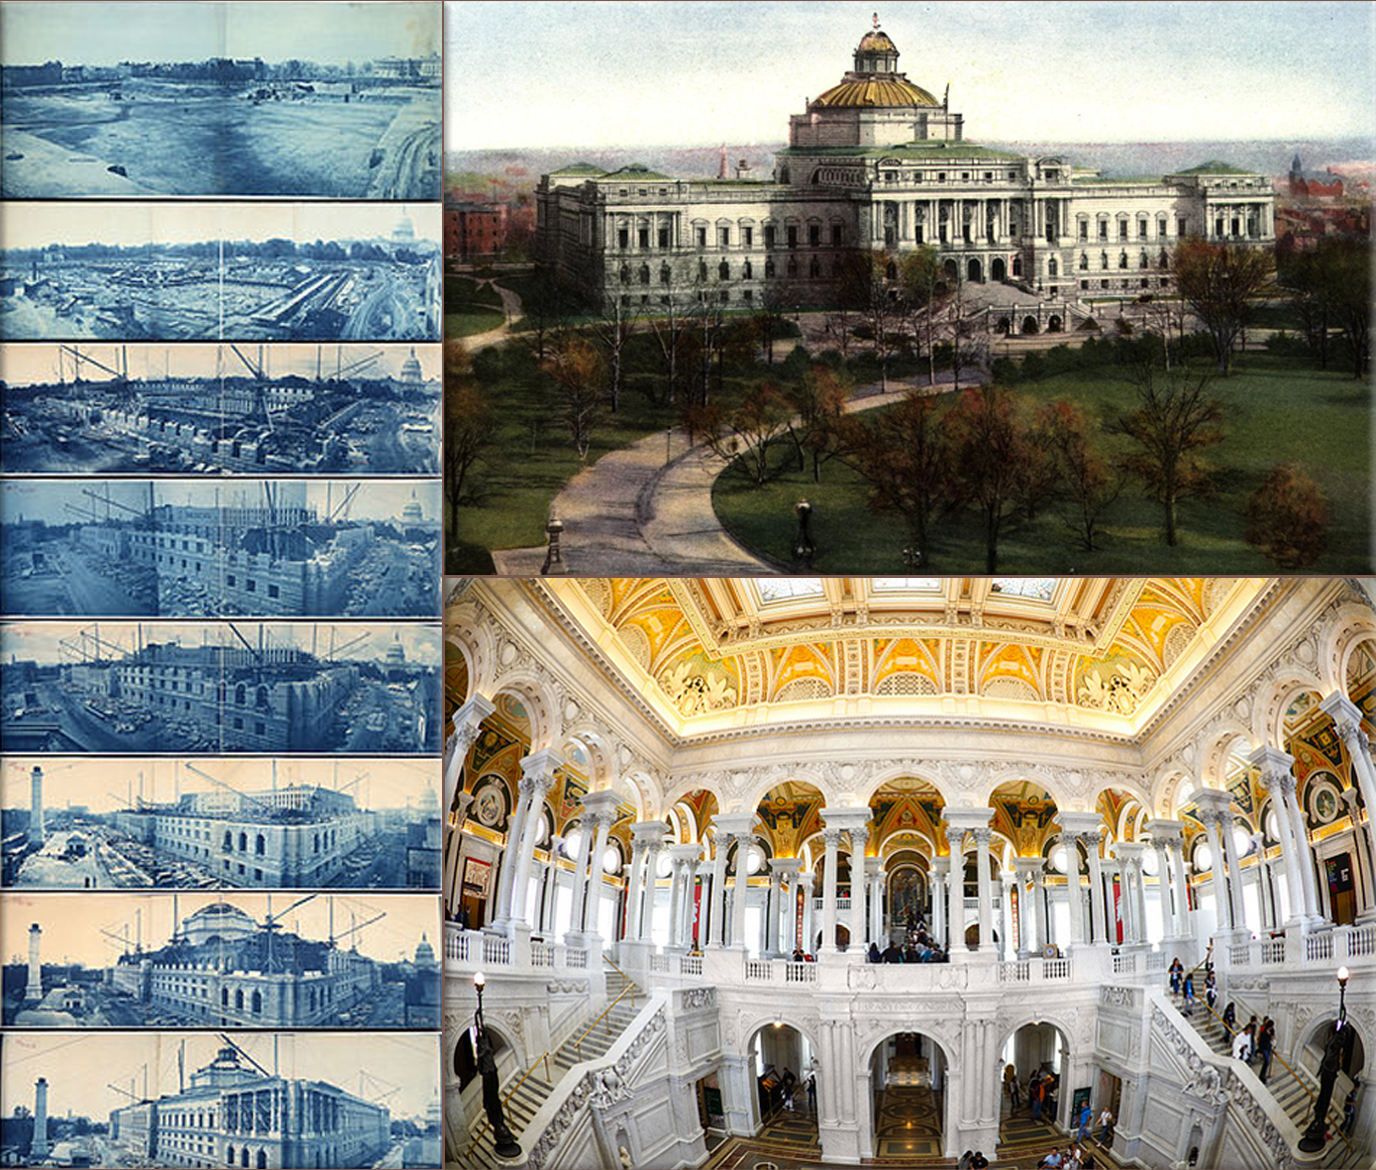 Library of Congress: Construction of the Thomas Jefferson Building, from July 8, 1888, to May 15, 1894 ● Library of Congress Art and Architecture ● Library of Congress interior